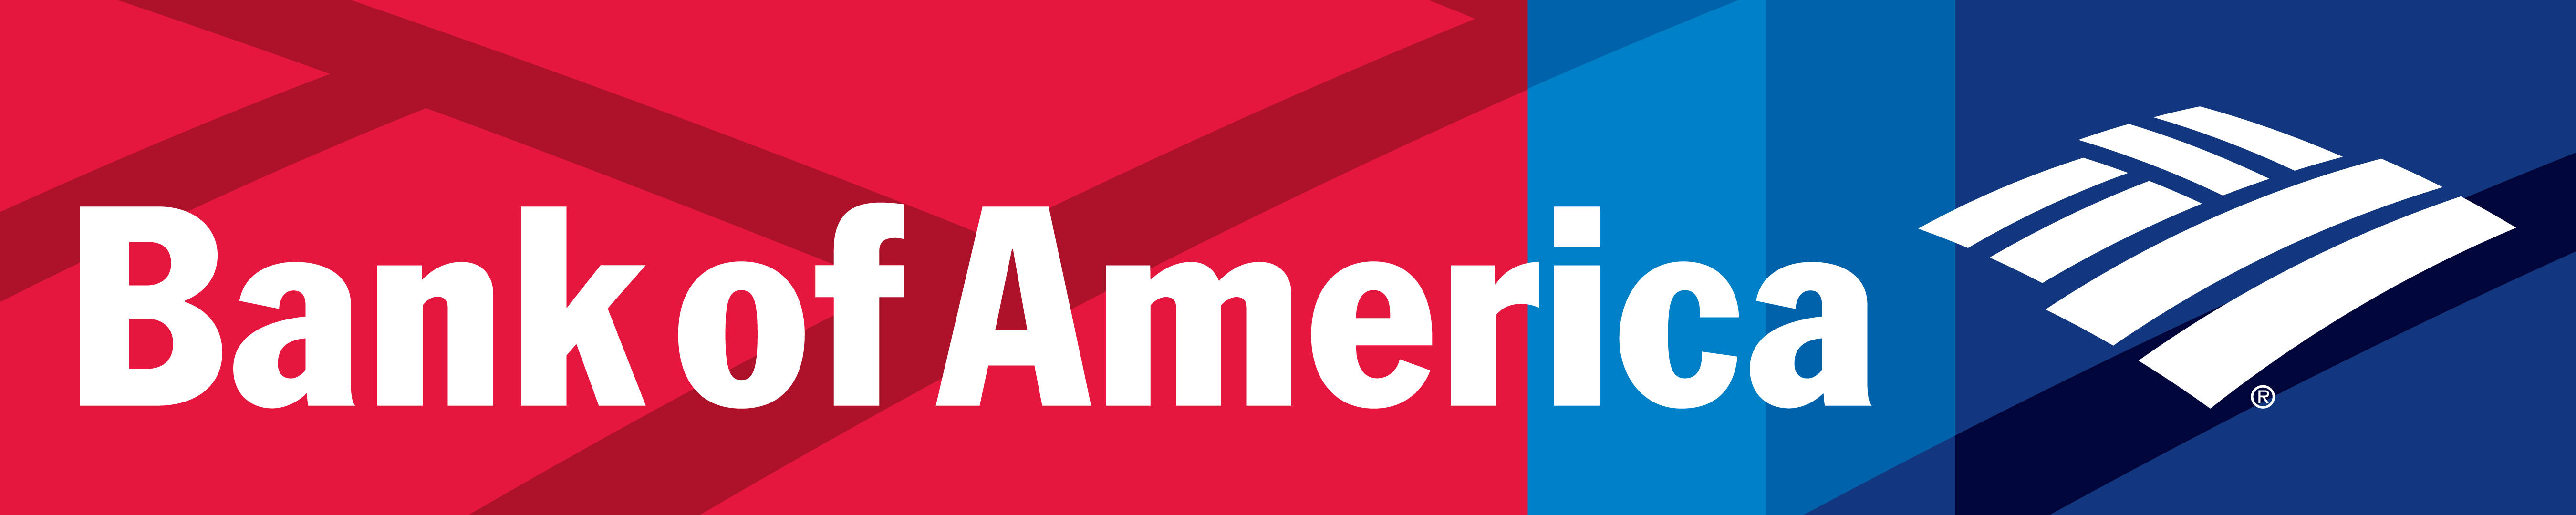 Blue And Red Bank Of America Logo Background